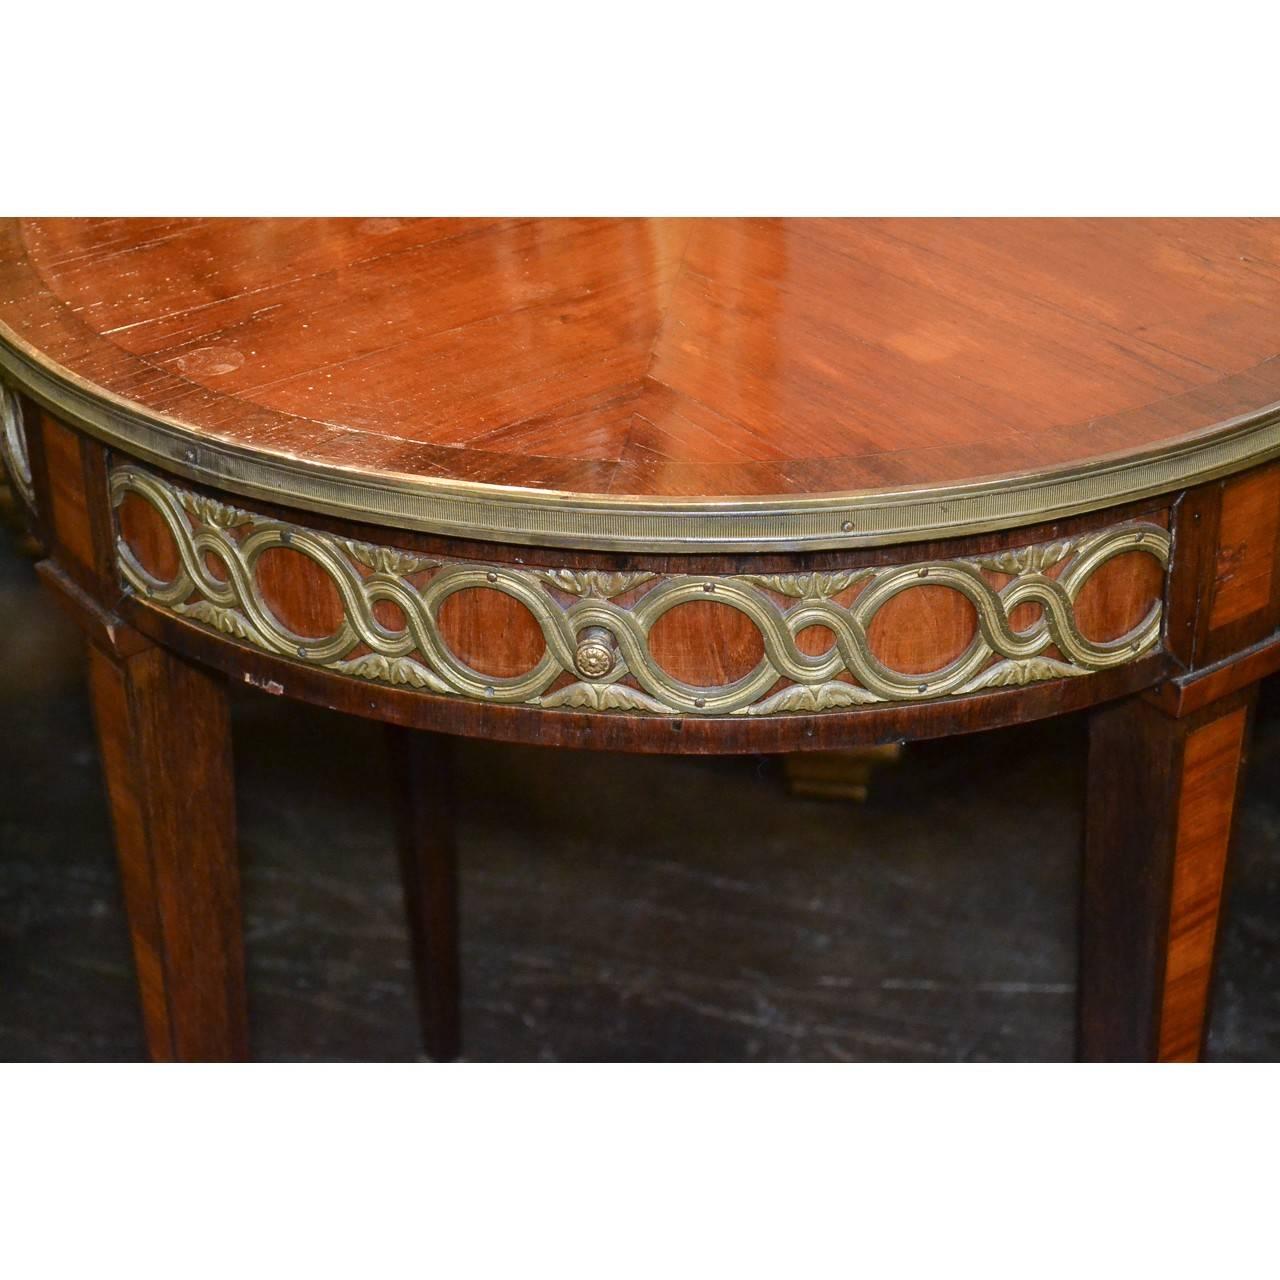 Exquisite 19th century French kingwood and rosewood banded circular side table or Bouillotte table with a leather inset pull-out drinks slide. The frieze superbly adorned in the round with stylized doré bronze mounts. The entire on square tapering